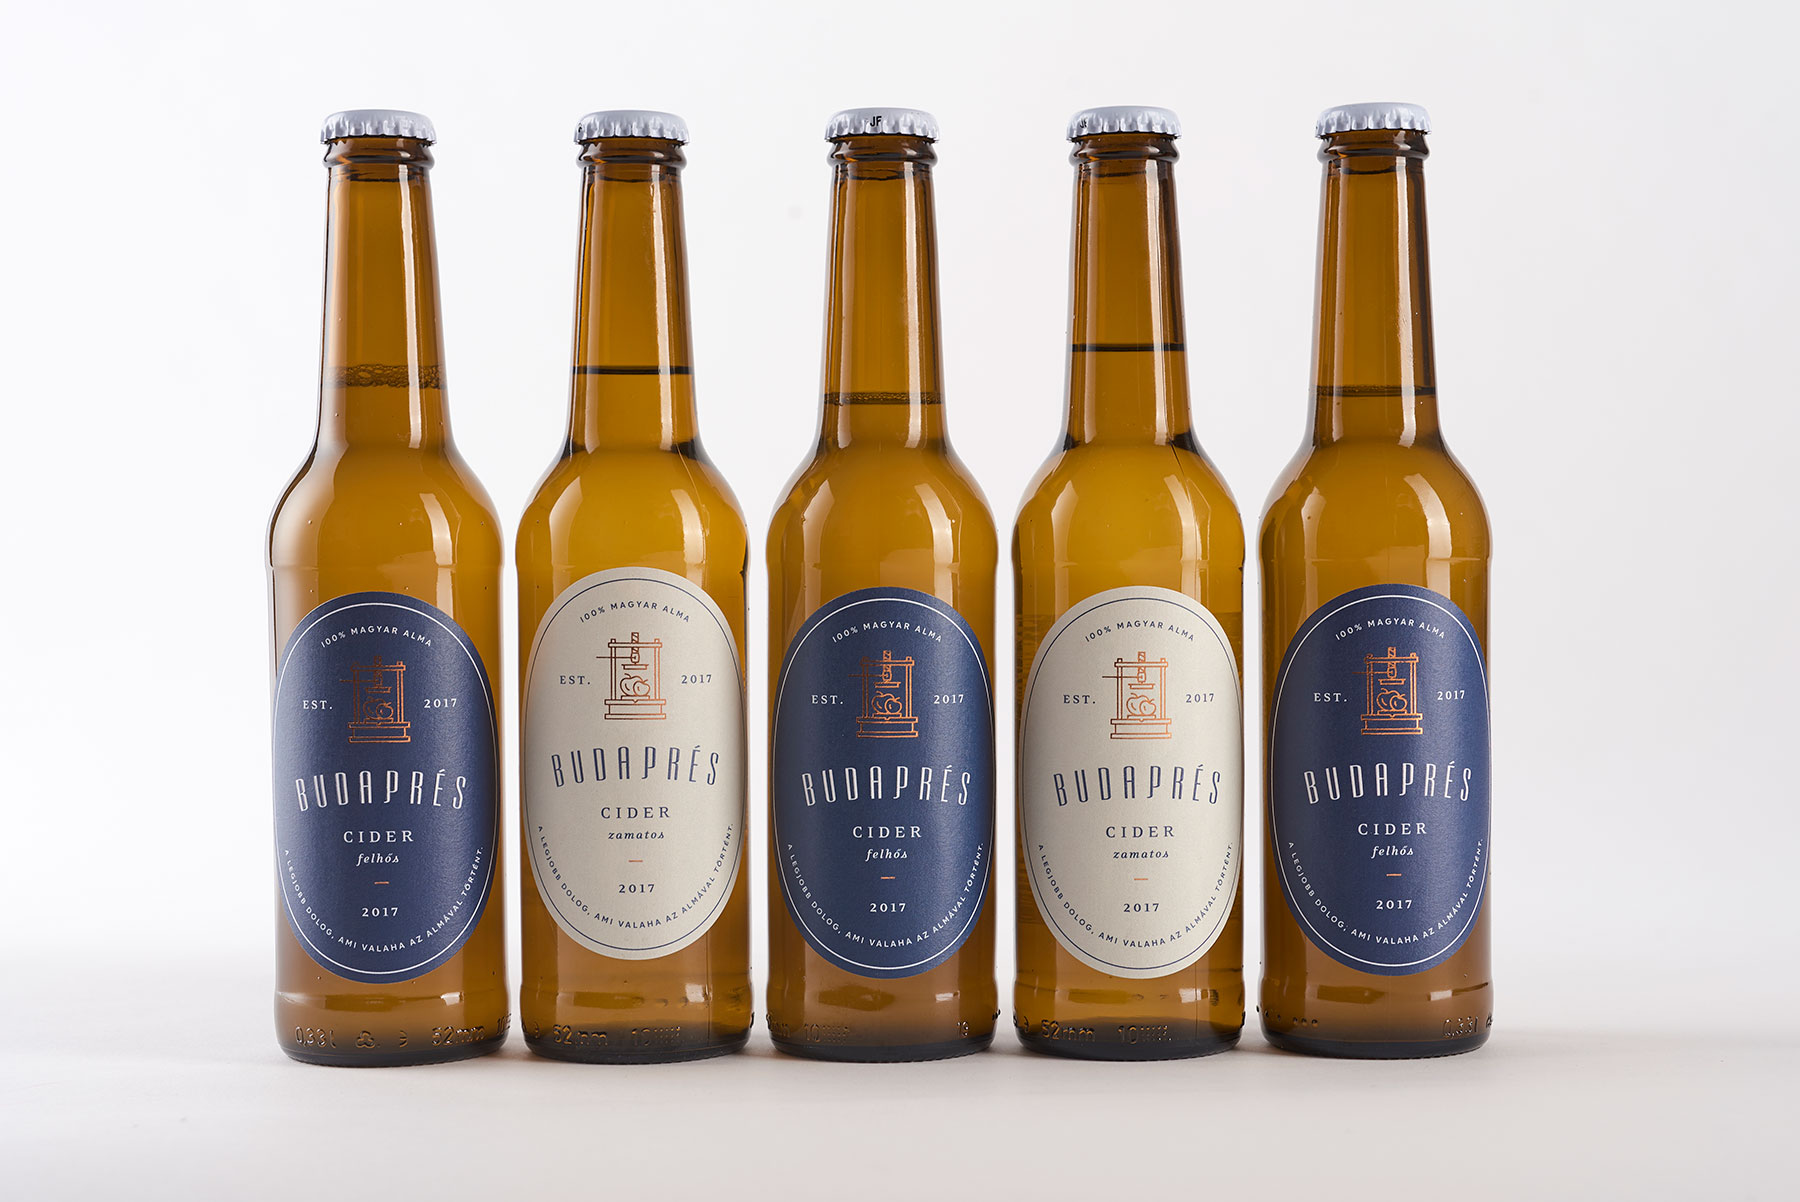 Budaprés Cider Comes With a Clean Visually Striking Label